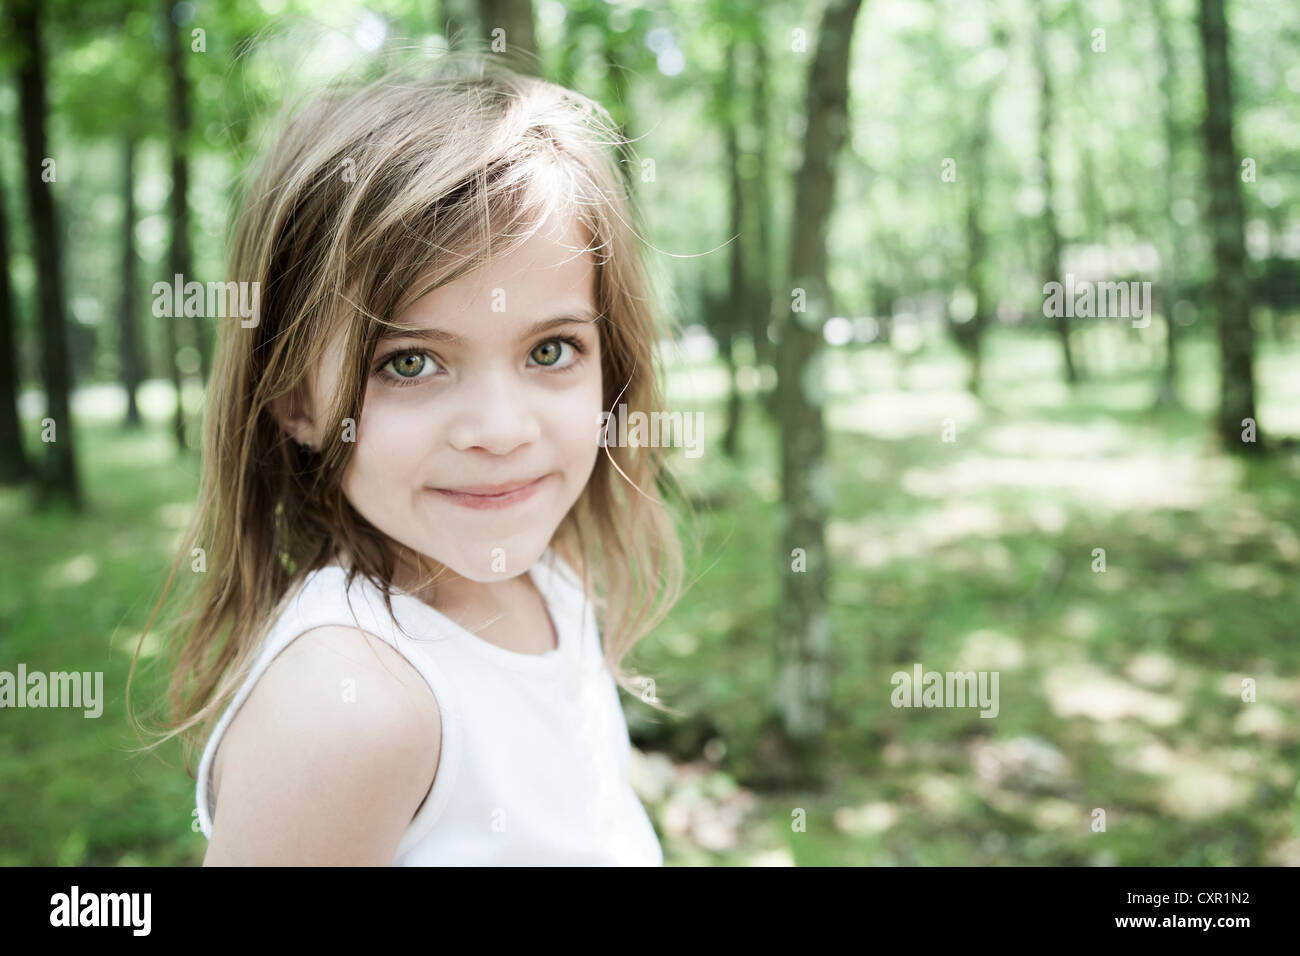 Girl in forest Stock Photo